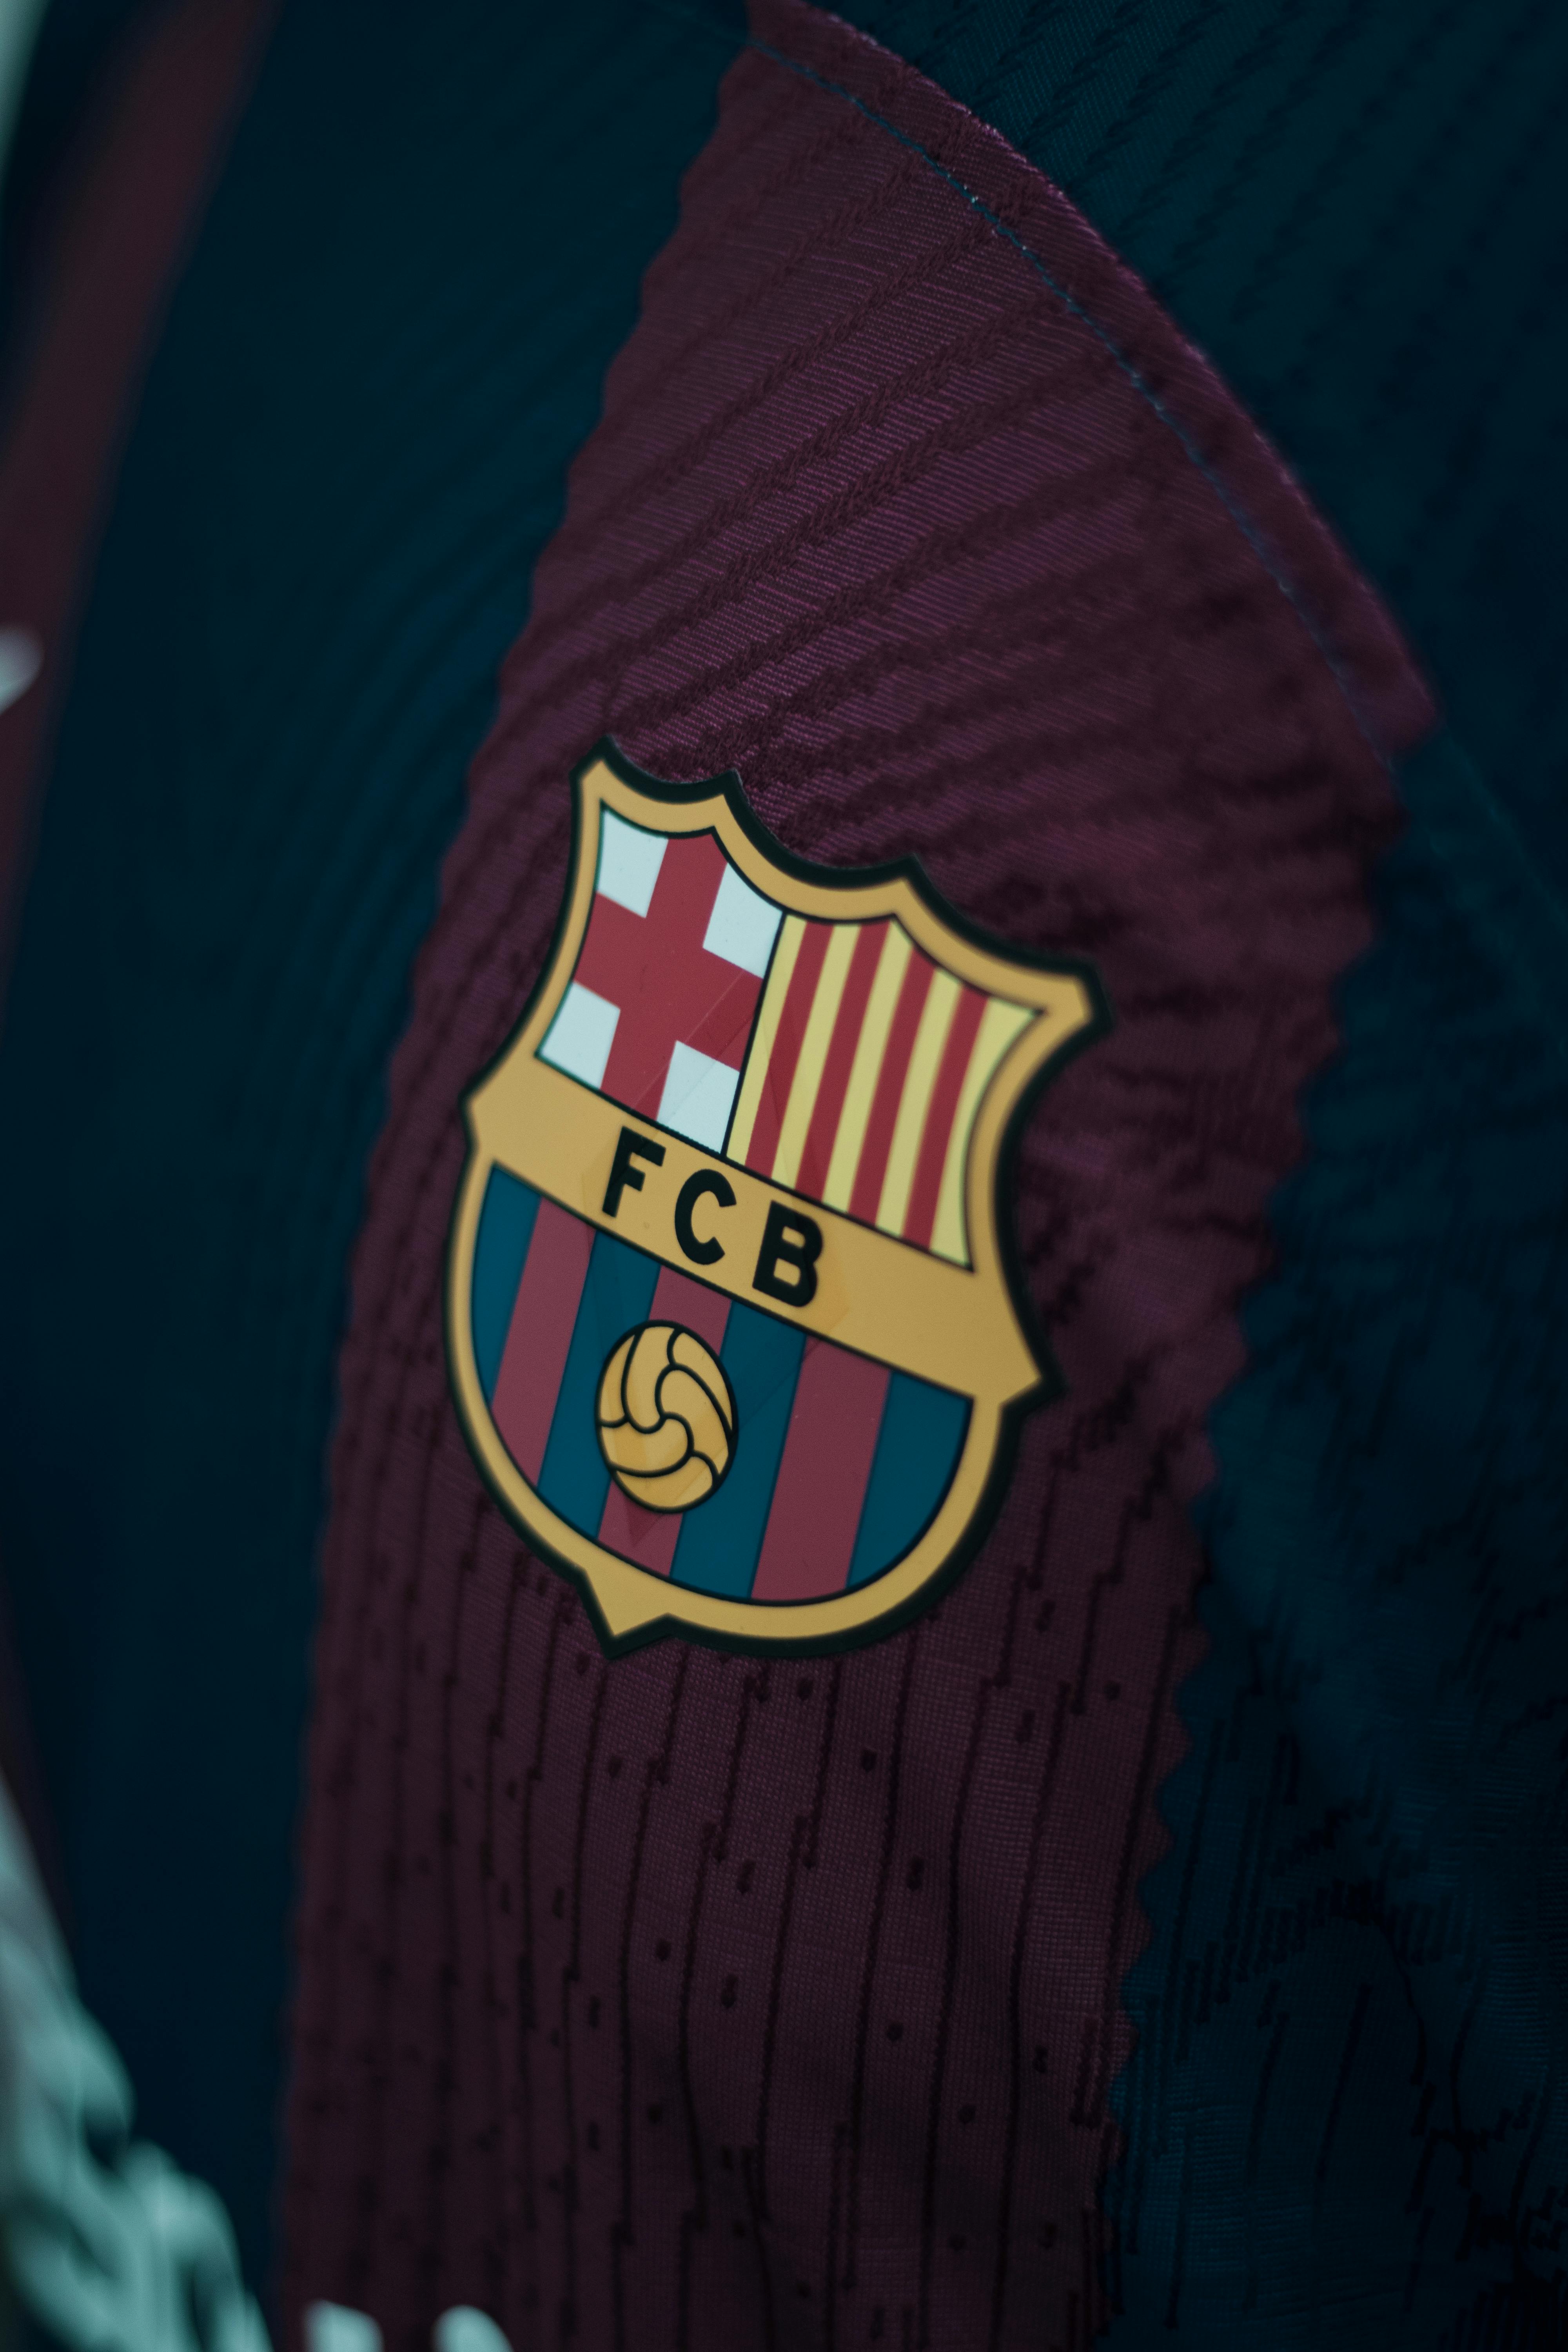 Download Fcb Nike Iphone Background Wallpaper